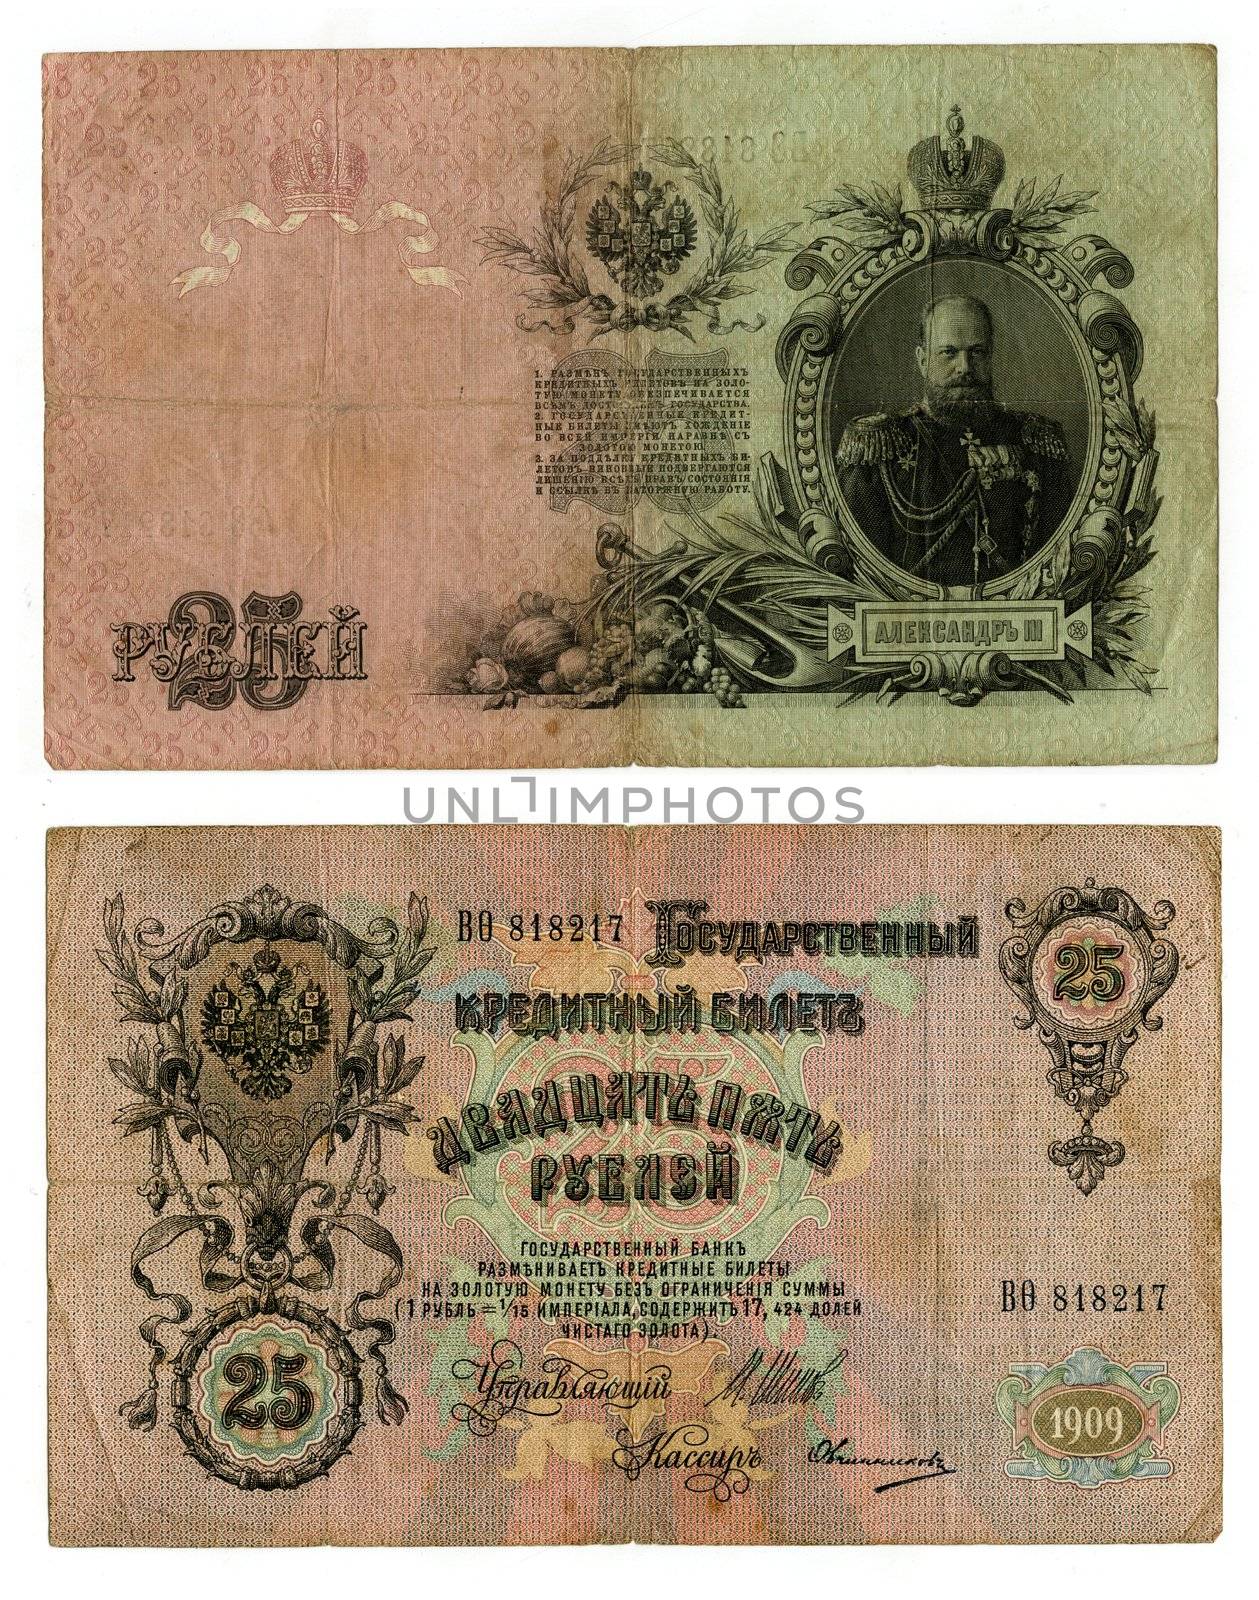 25 old russian rubles (obverse and reverse)